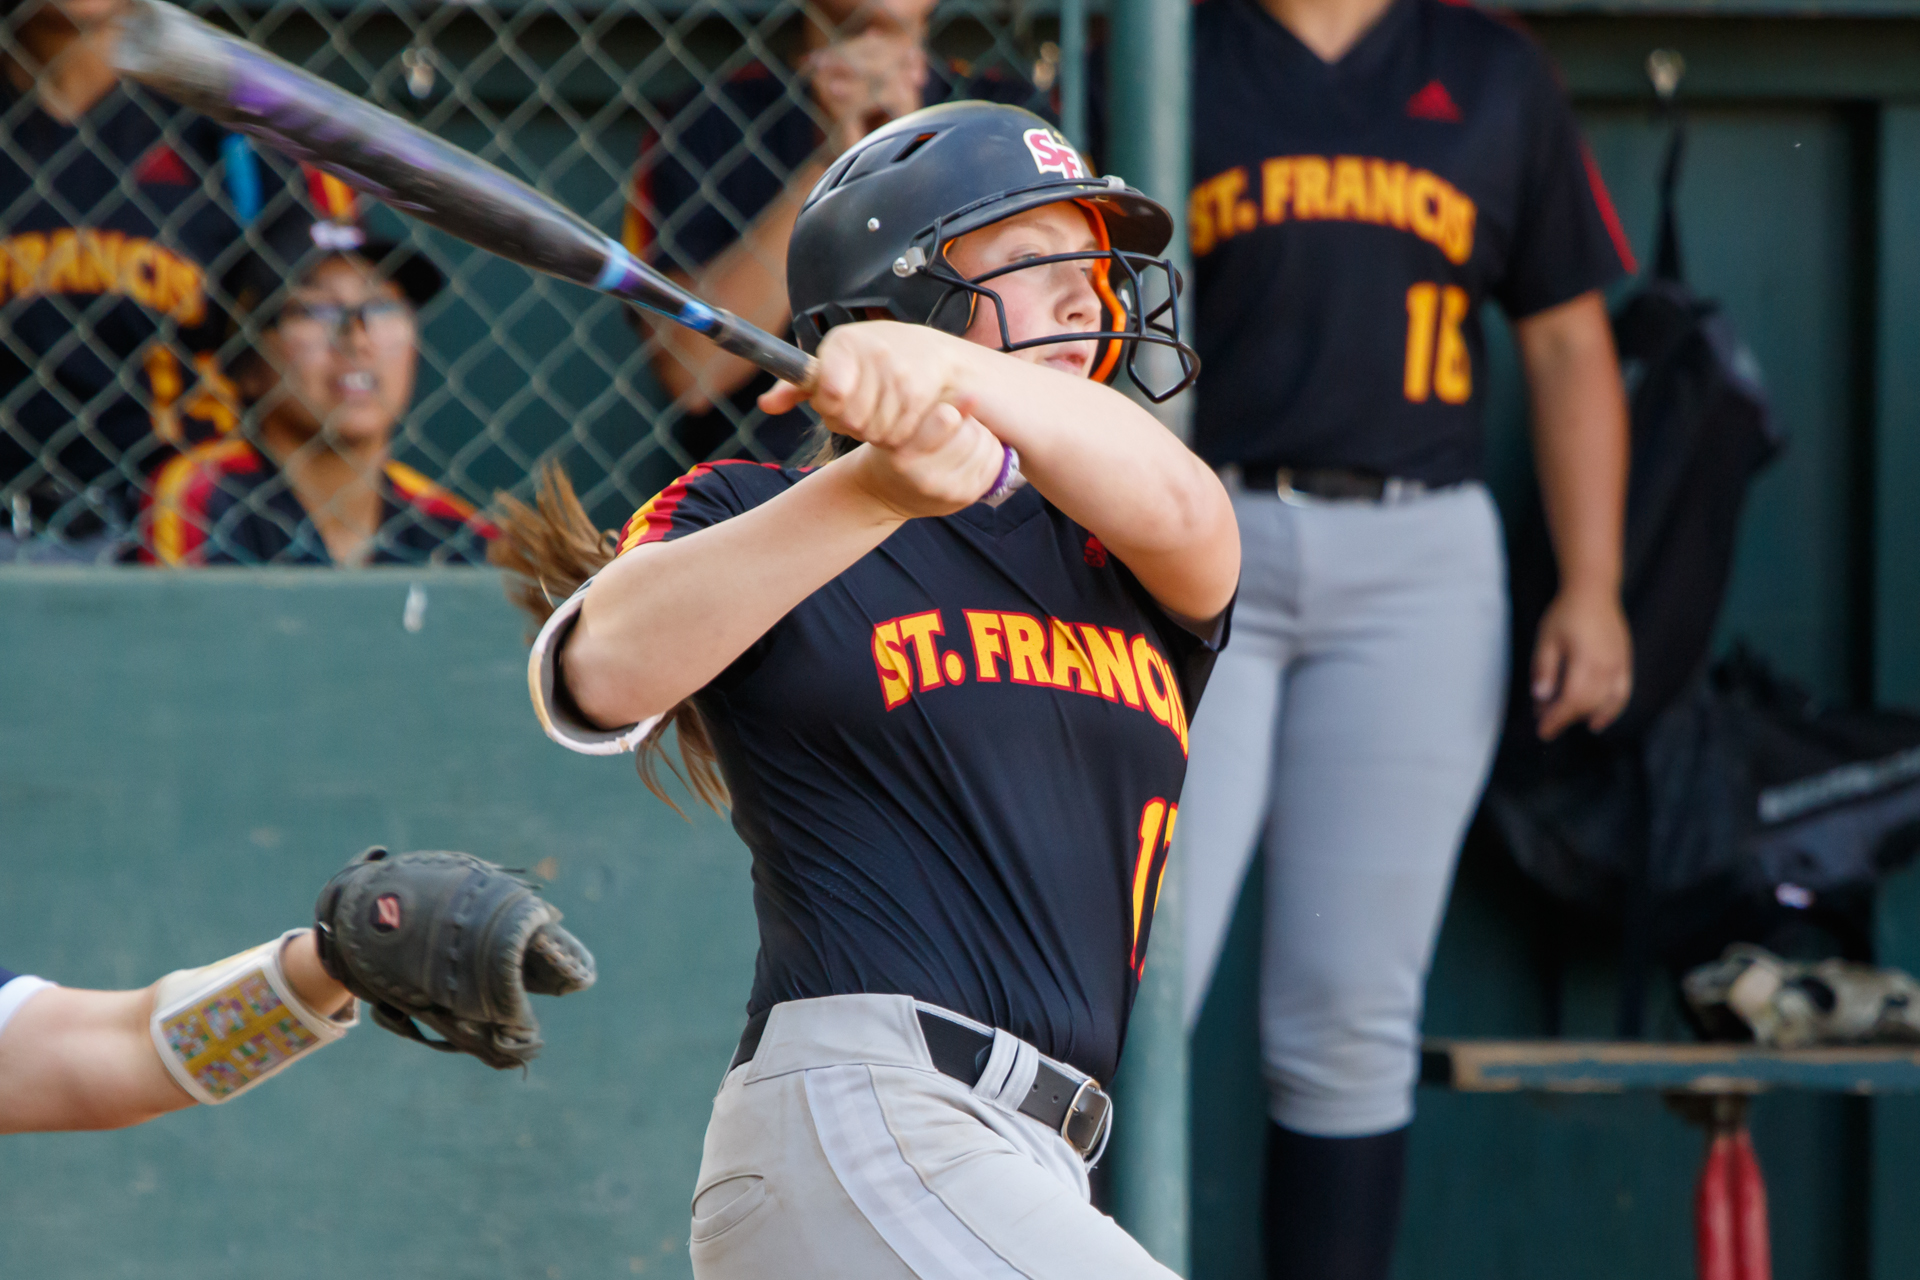 St. Francis tops Vista for eighth straight win